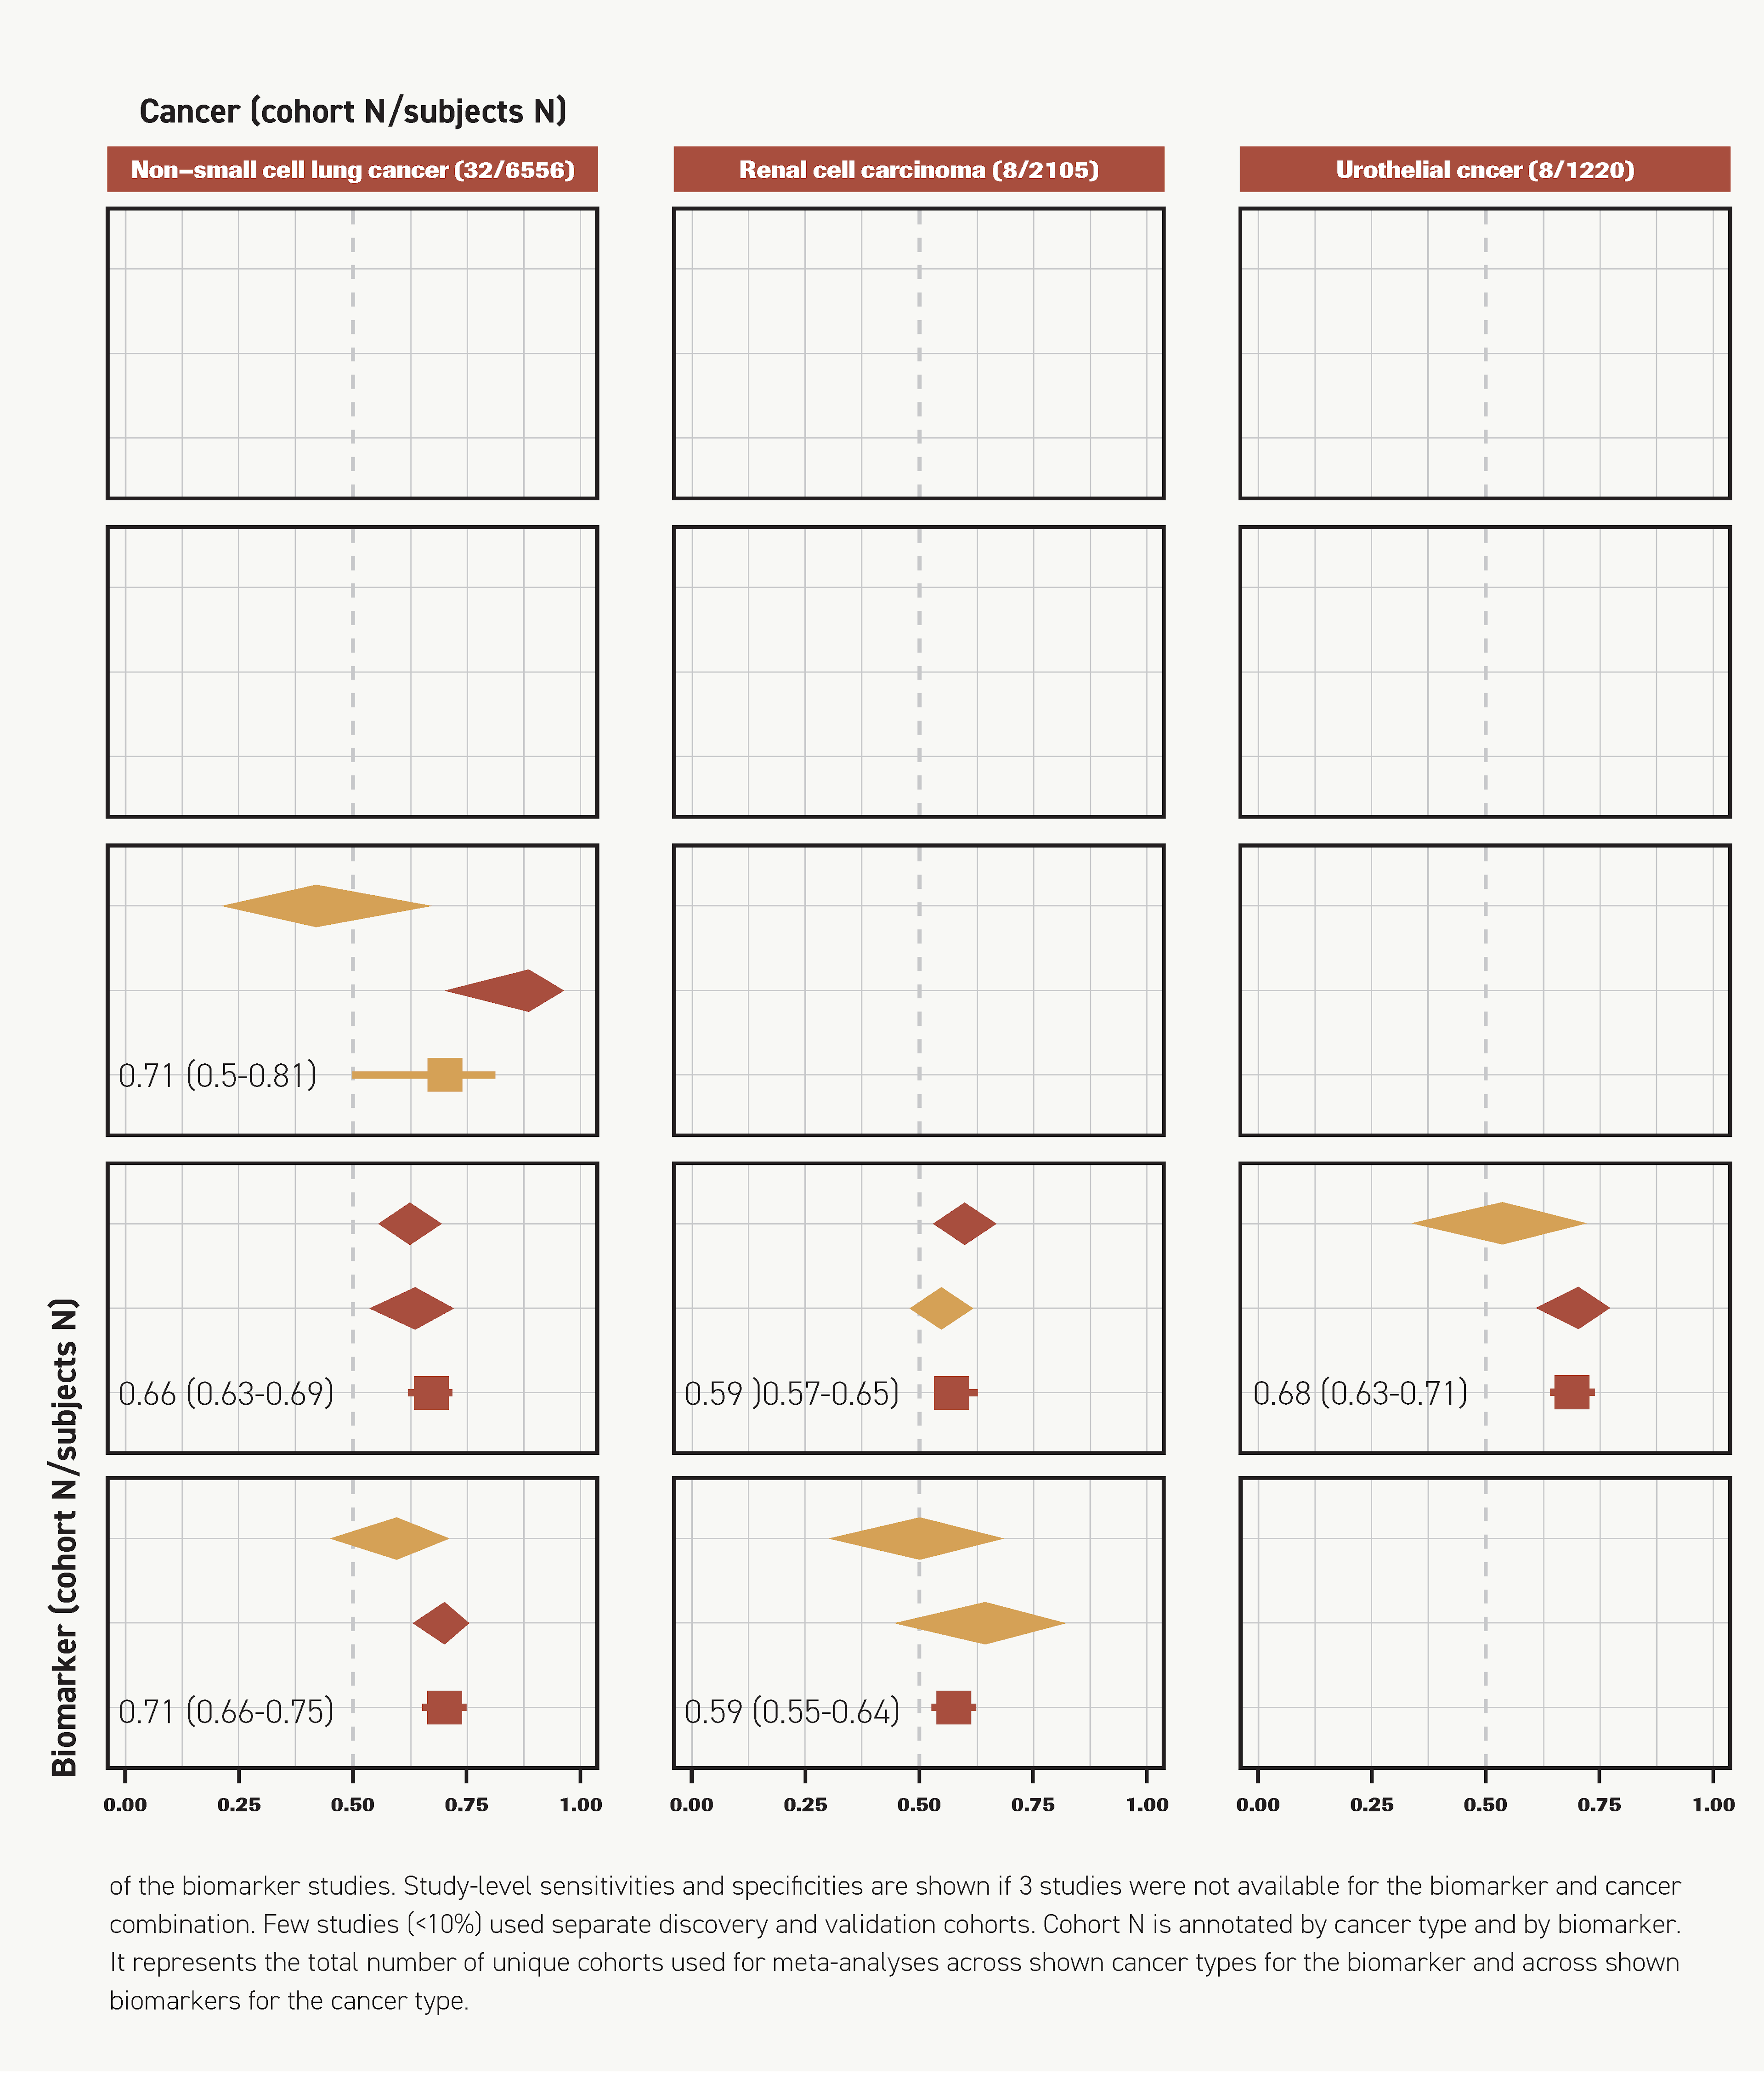 FIGURE 2. Diagnostic Accuracy Metrics of Biomarkers by Most Frequently Investigated Cancer Types